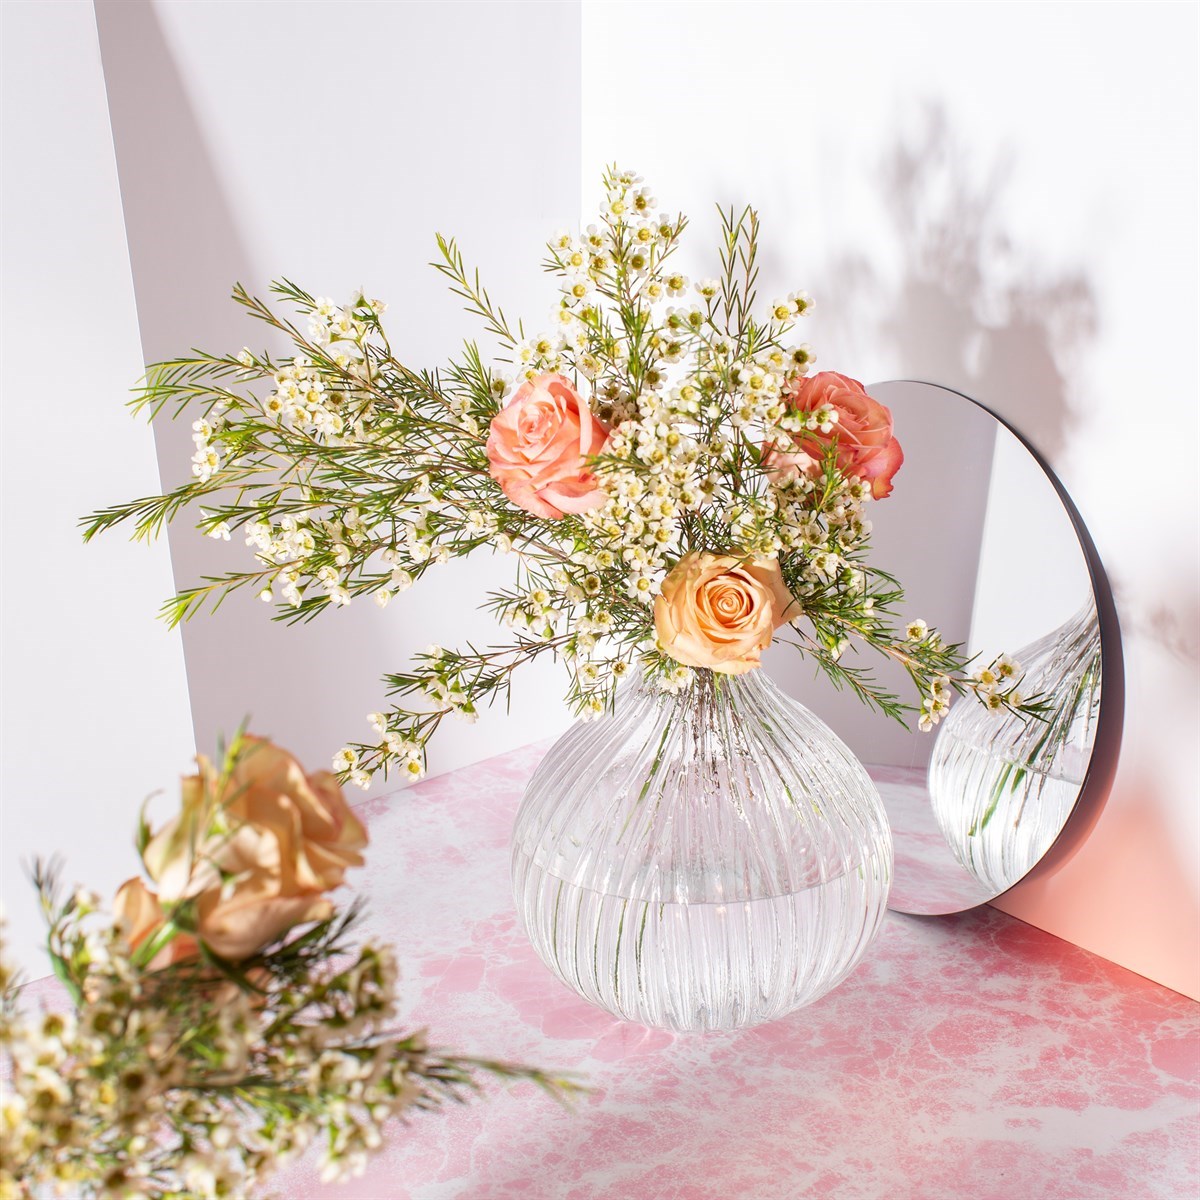 Round Fluted Glass Clear Vase